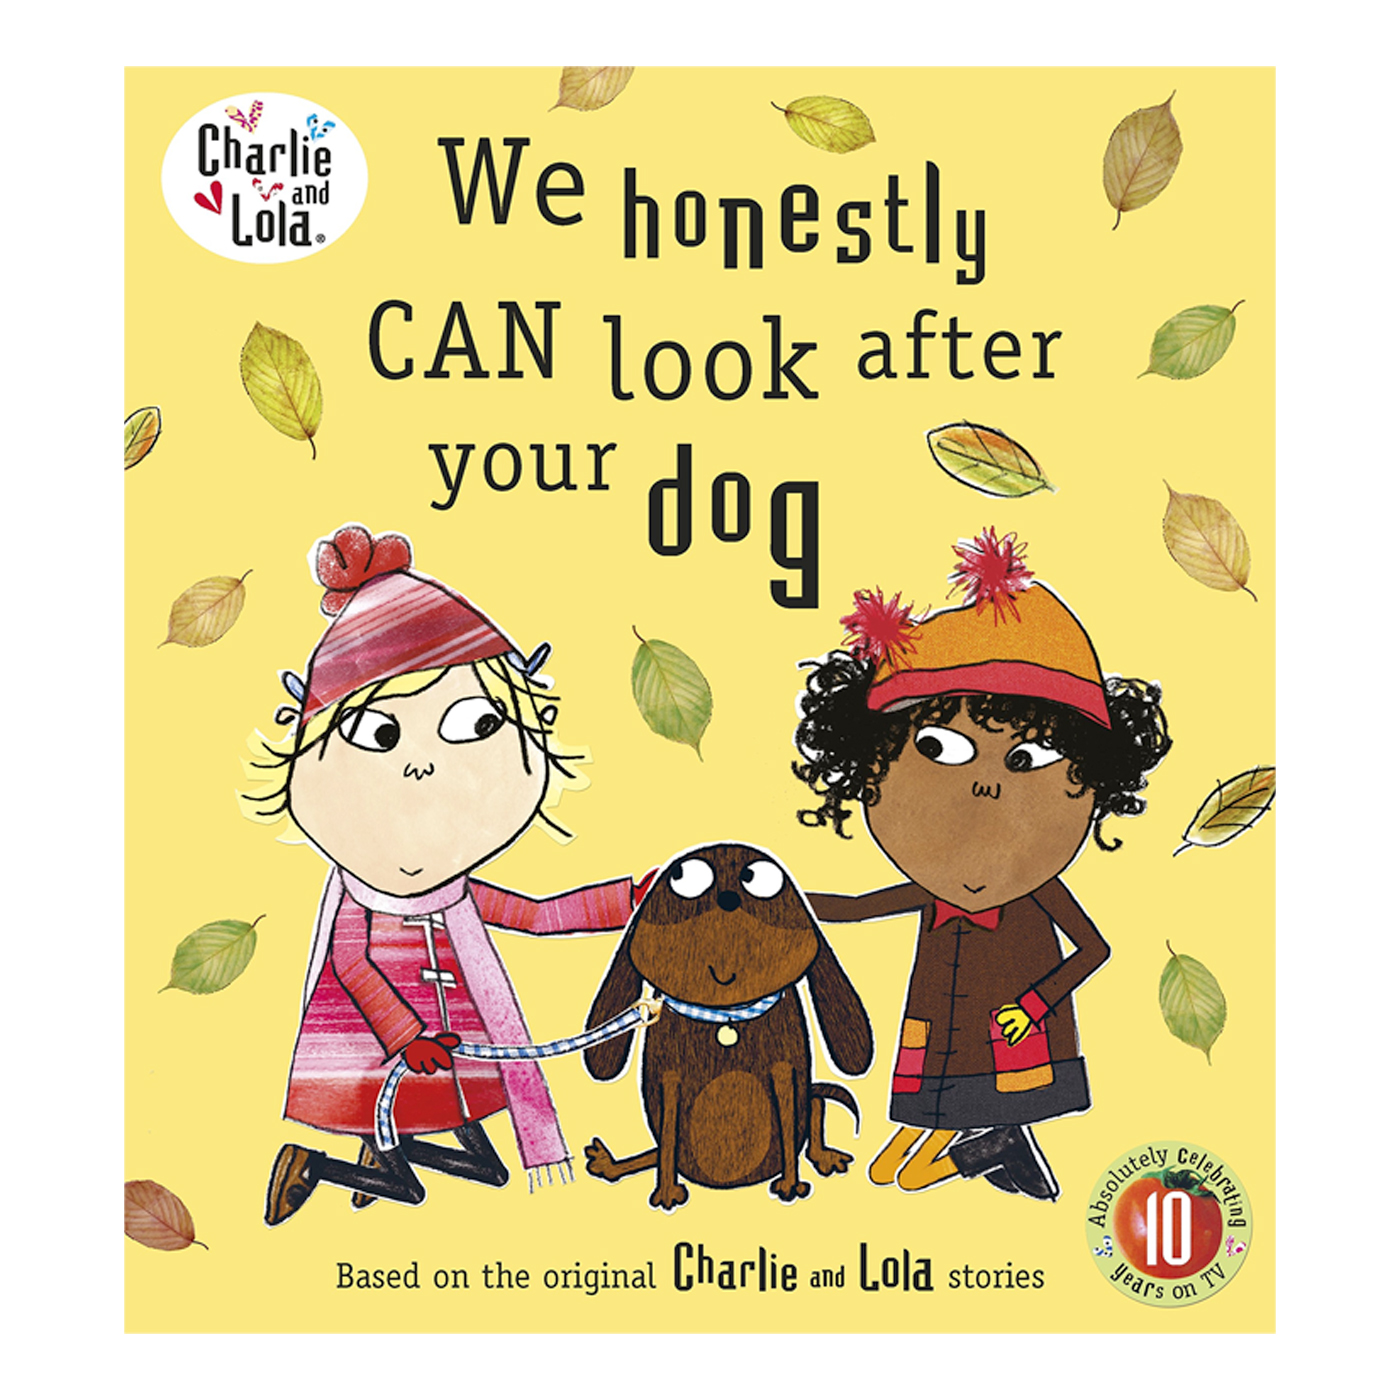  Charlie And Lola: We Honestly Can Look After Your Dog